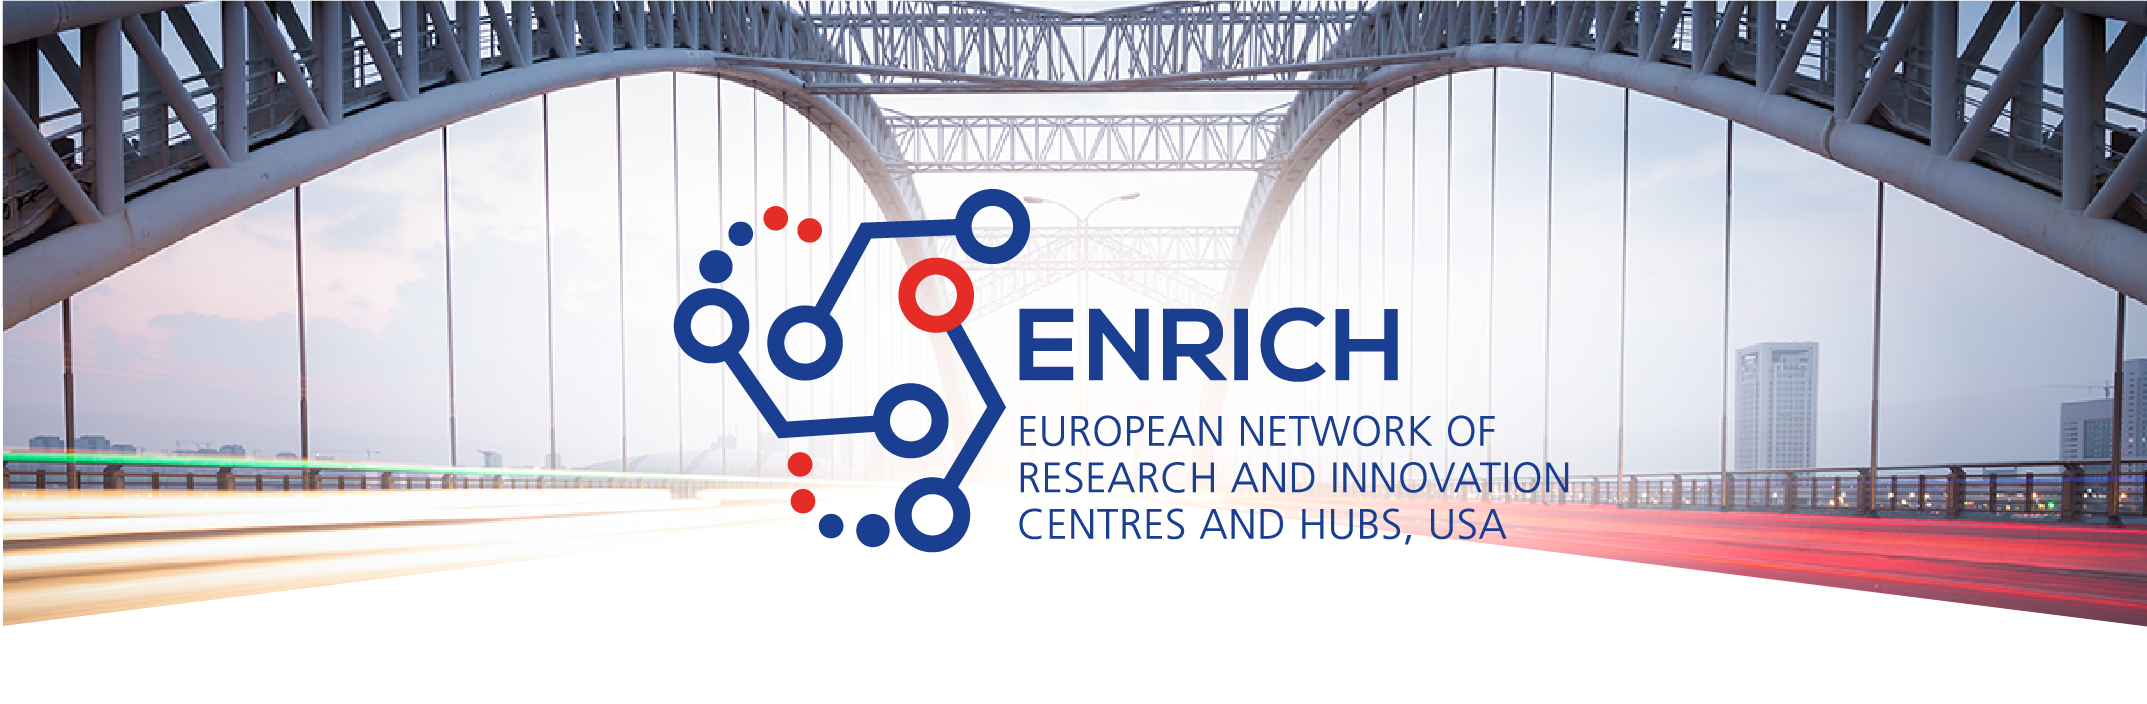 ENRICH in the USA Aerospace Sector Focused Tour 